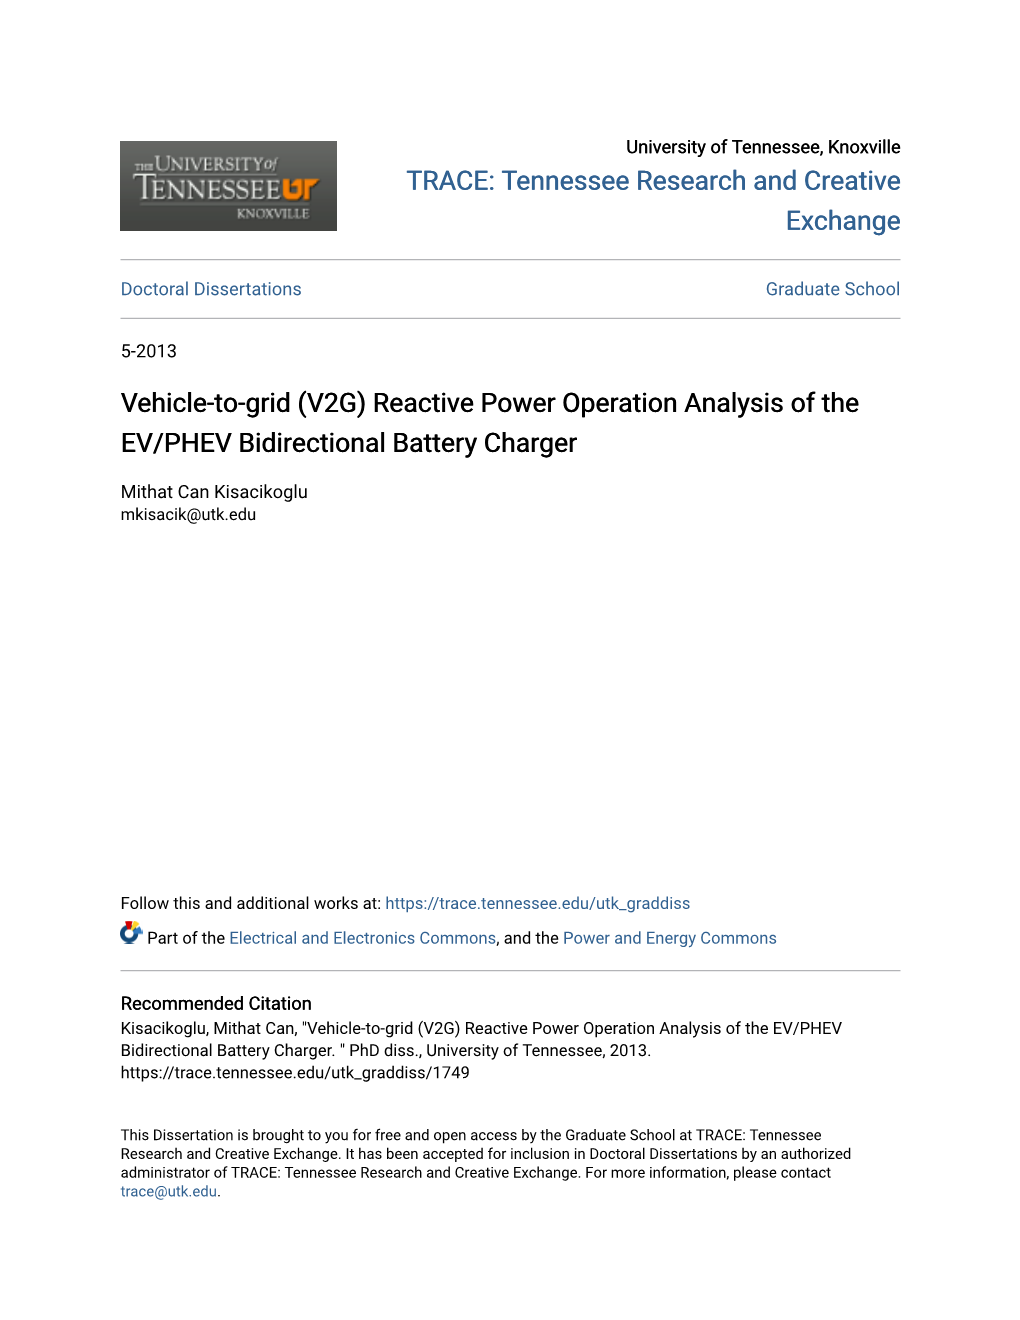 Vehicle-To-Grid (V2G) Reactive Power Operation Analysis of the EV/PHEV Bidirectional Battery Charger